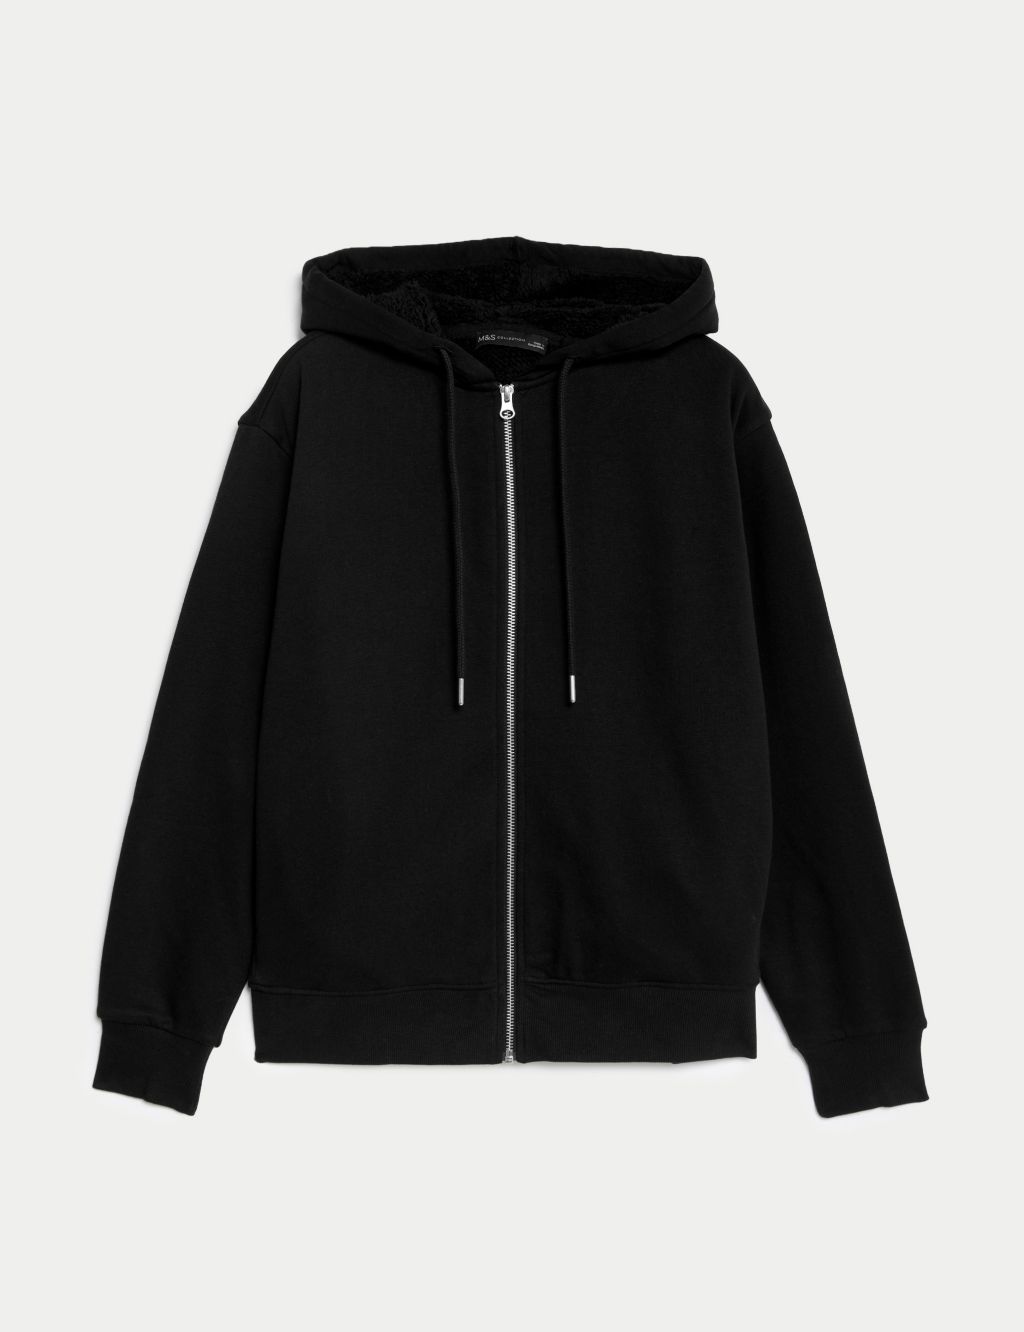 Cotton Rich Borg Lined Zip Up Hoodie image 2